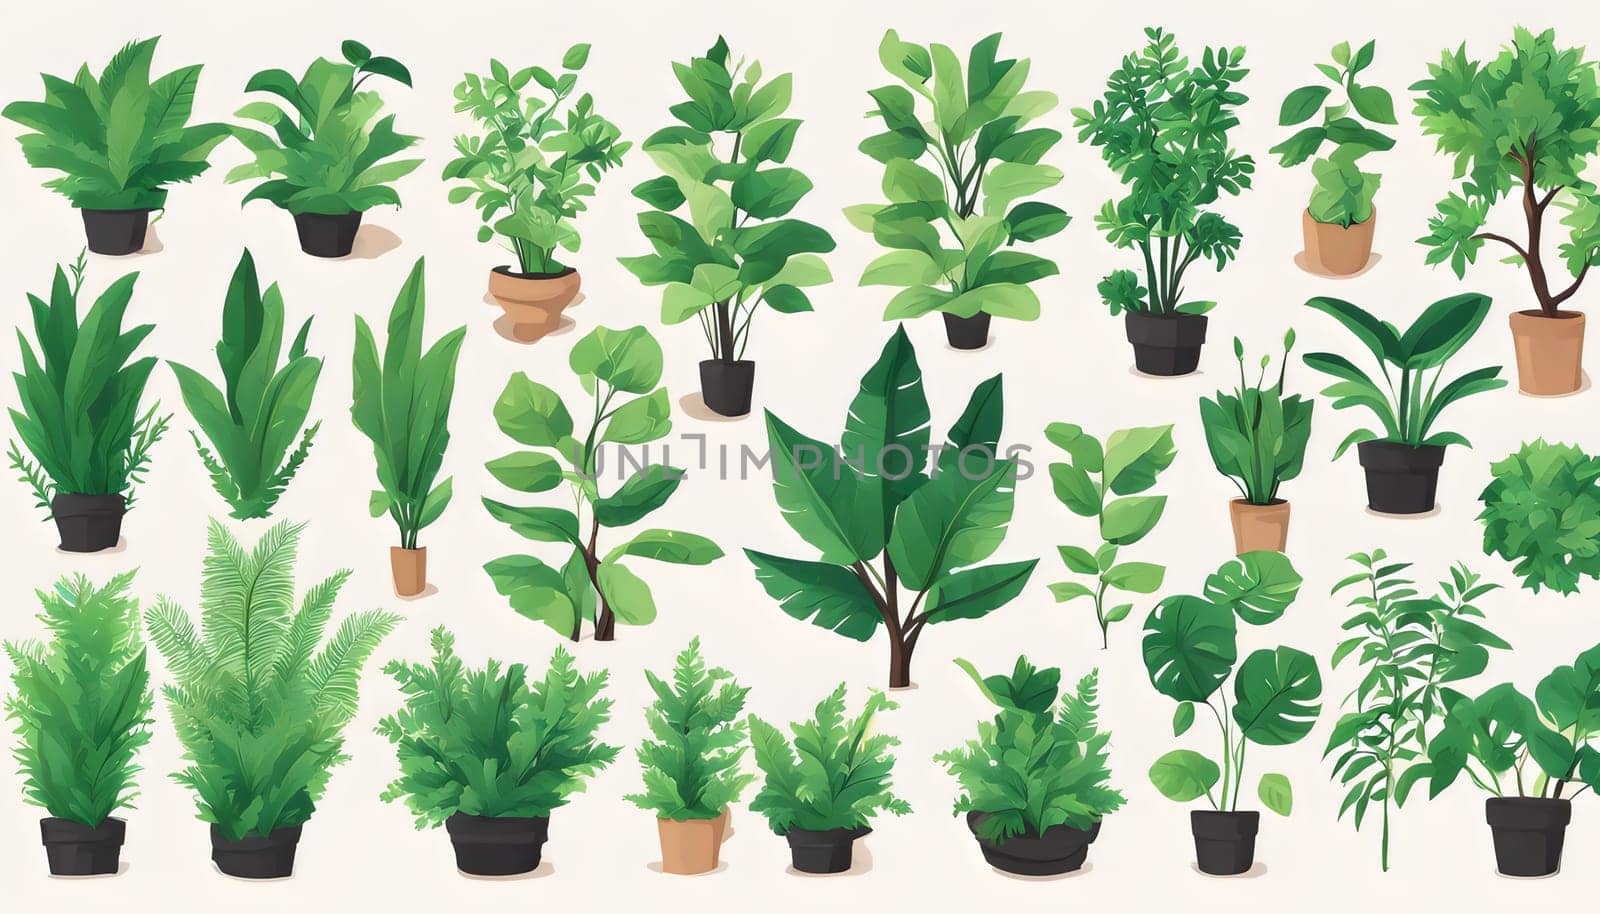 Assortment of Potted Houseplants by rostik924